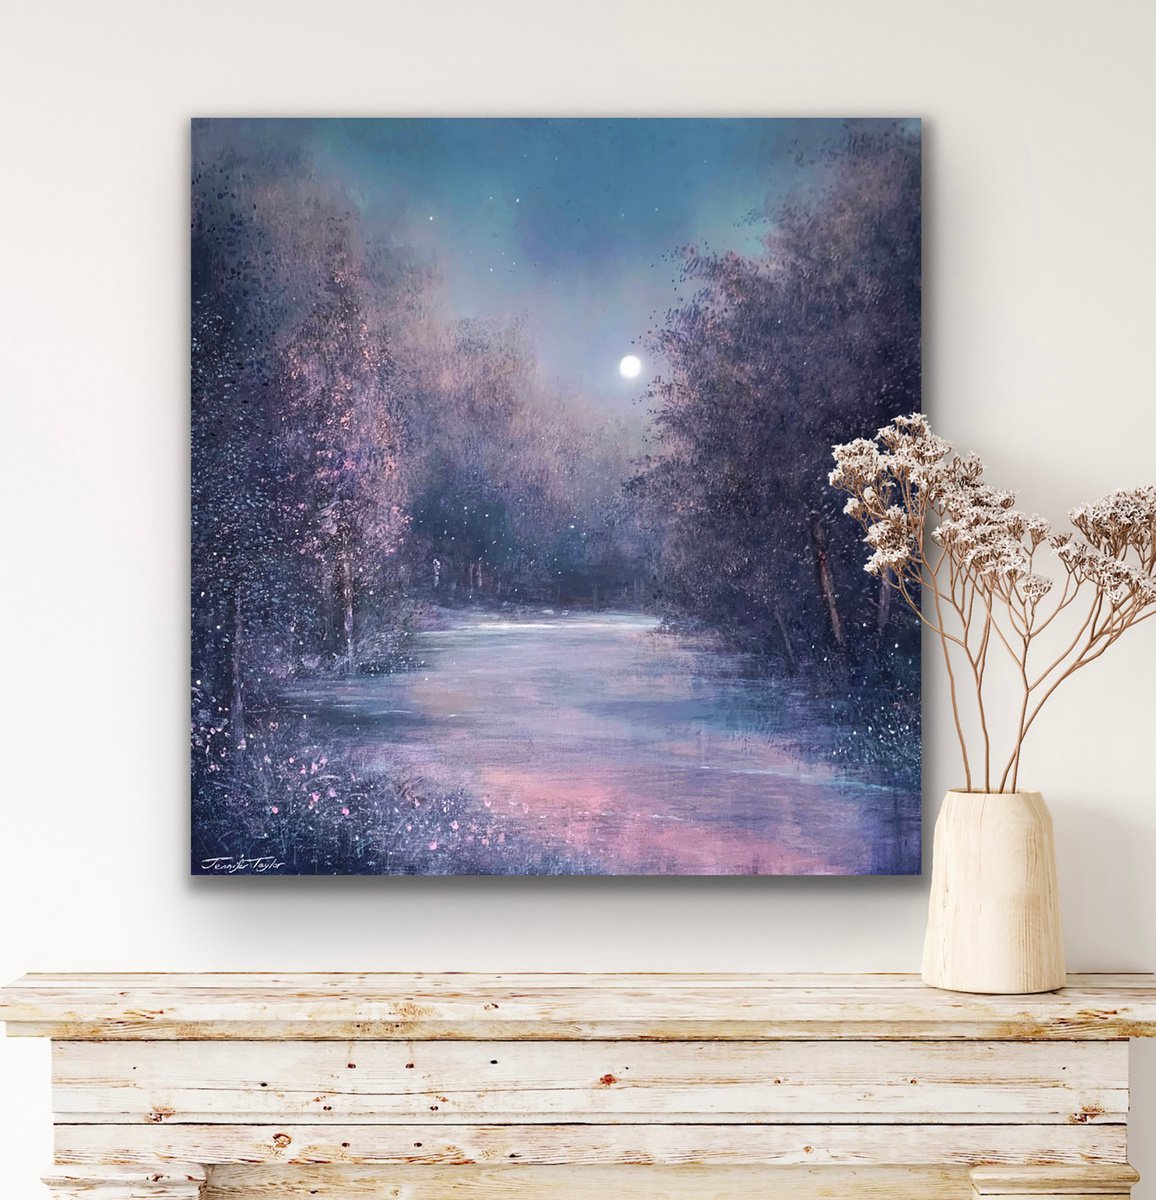 Song Of The River Blossoms - Original Oil Painting On Linen By Jennifer Taylor by Jennifer Taylor